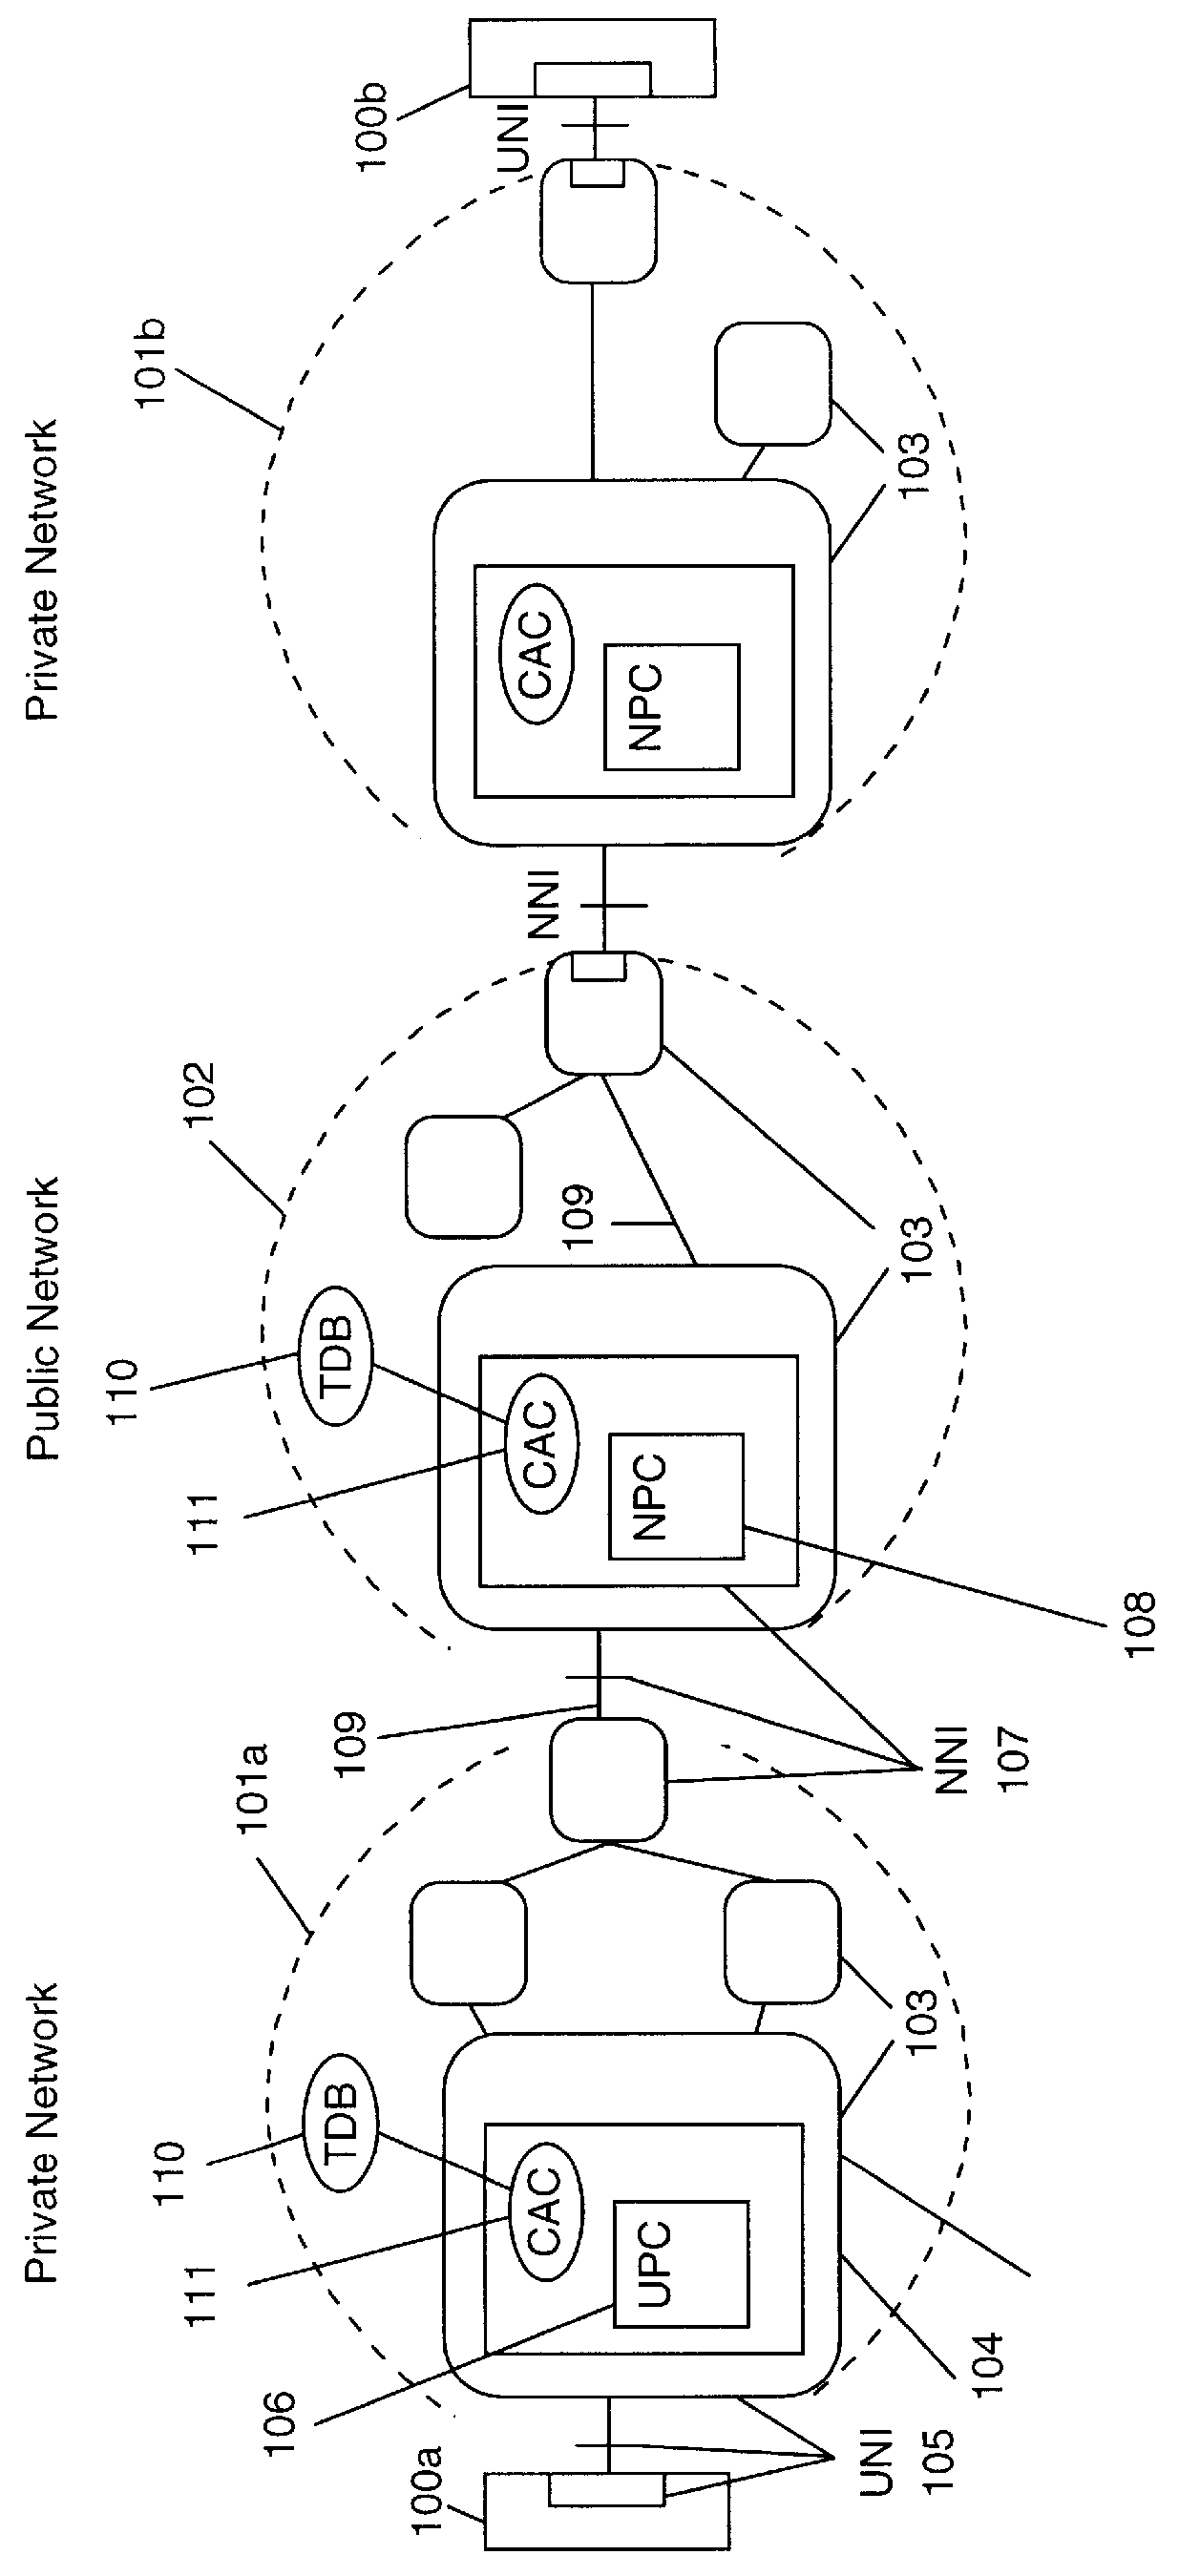 Flow control for very bursty connections in high speed cell switching networks